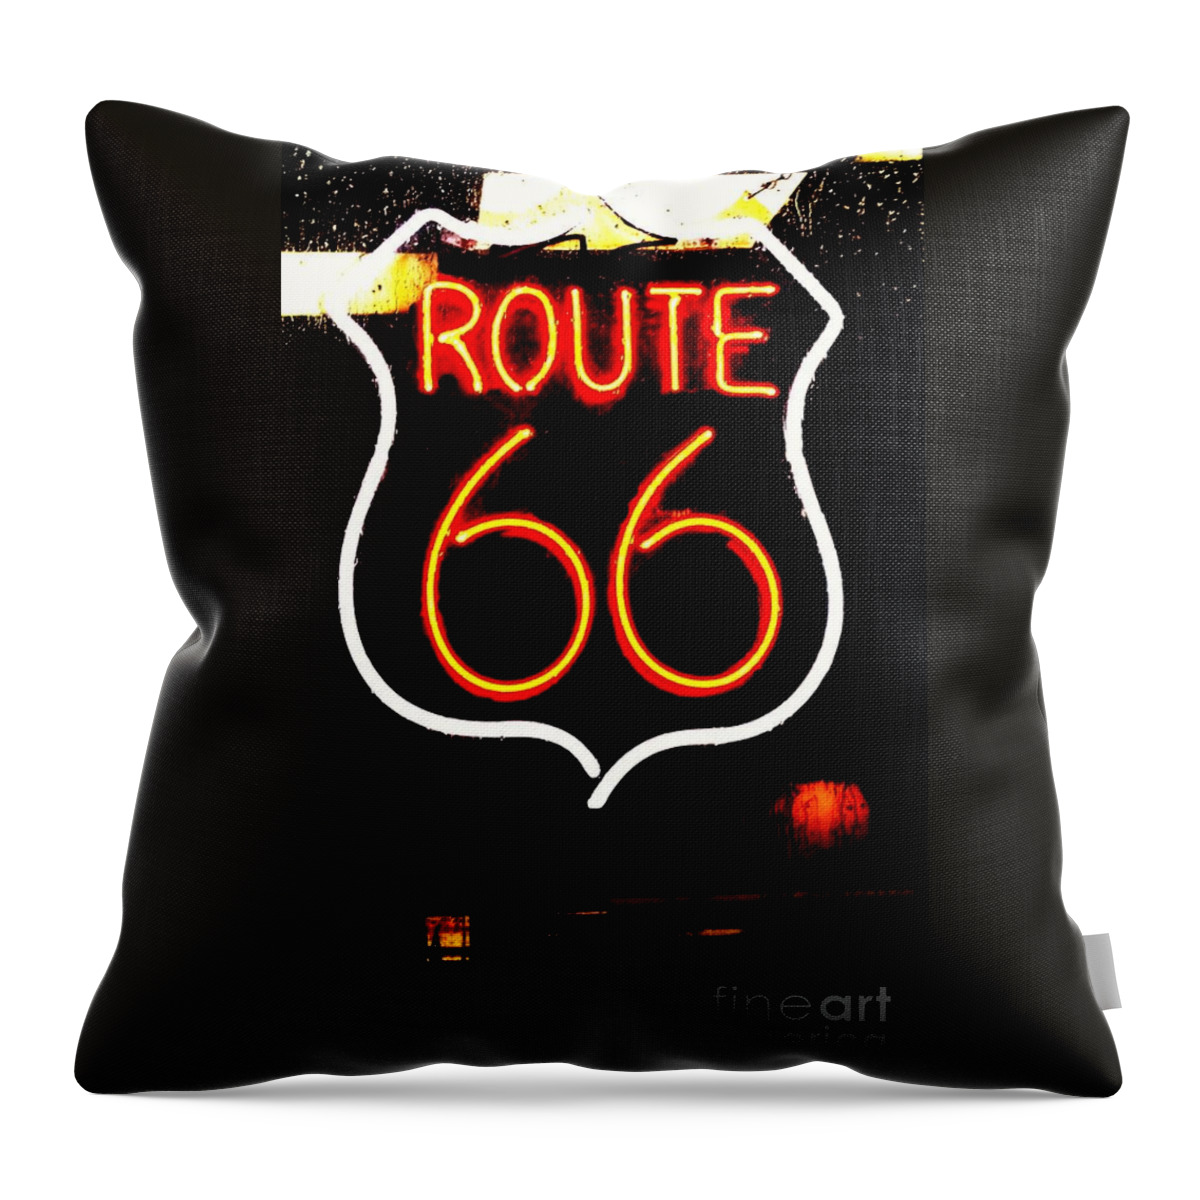  Throw Pillow featuring the photograph Route 66 2 by Kelly Awad